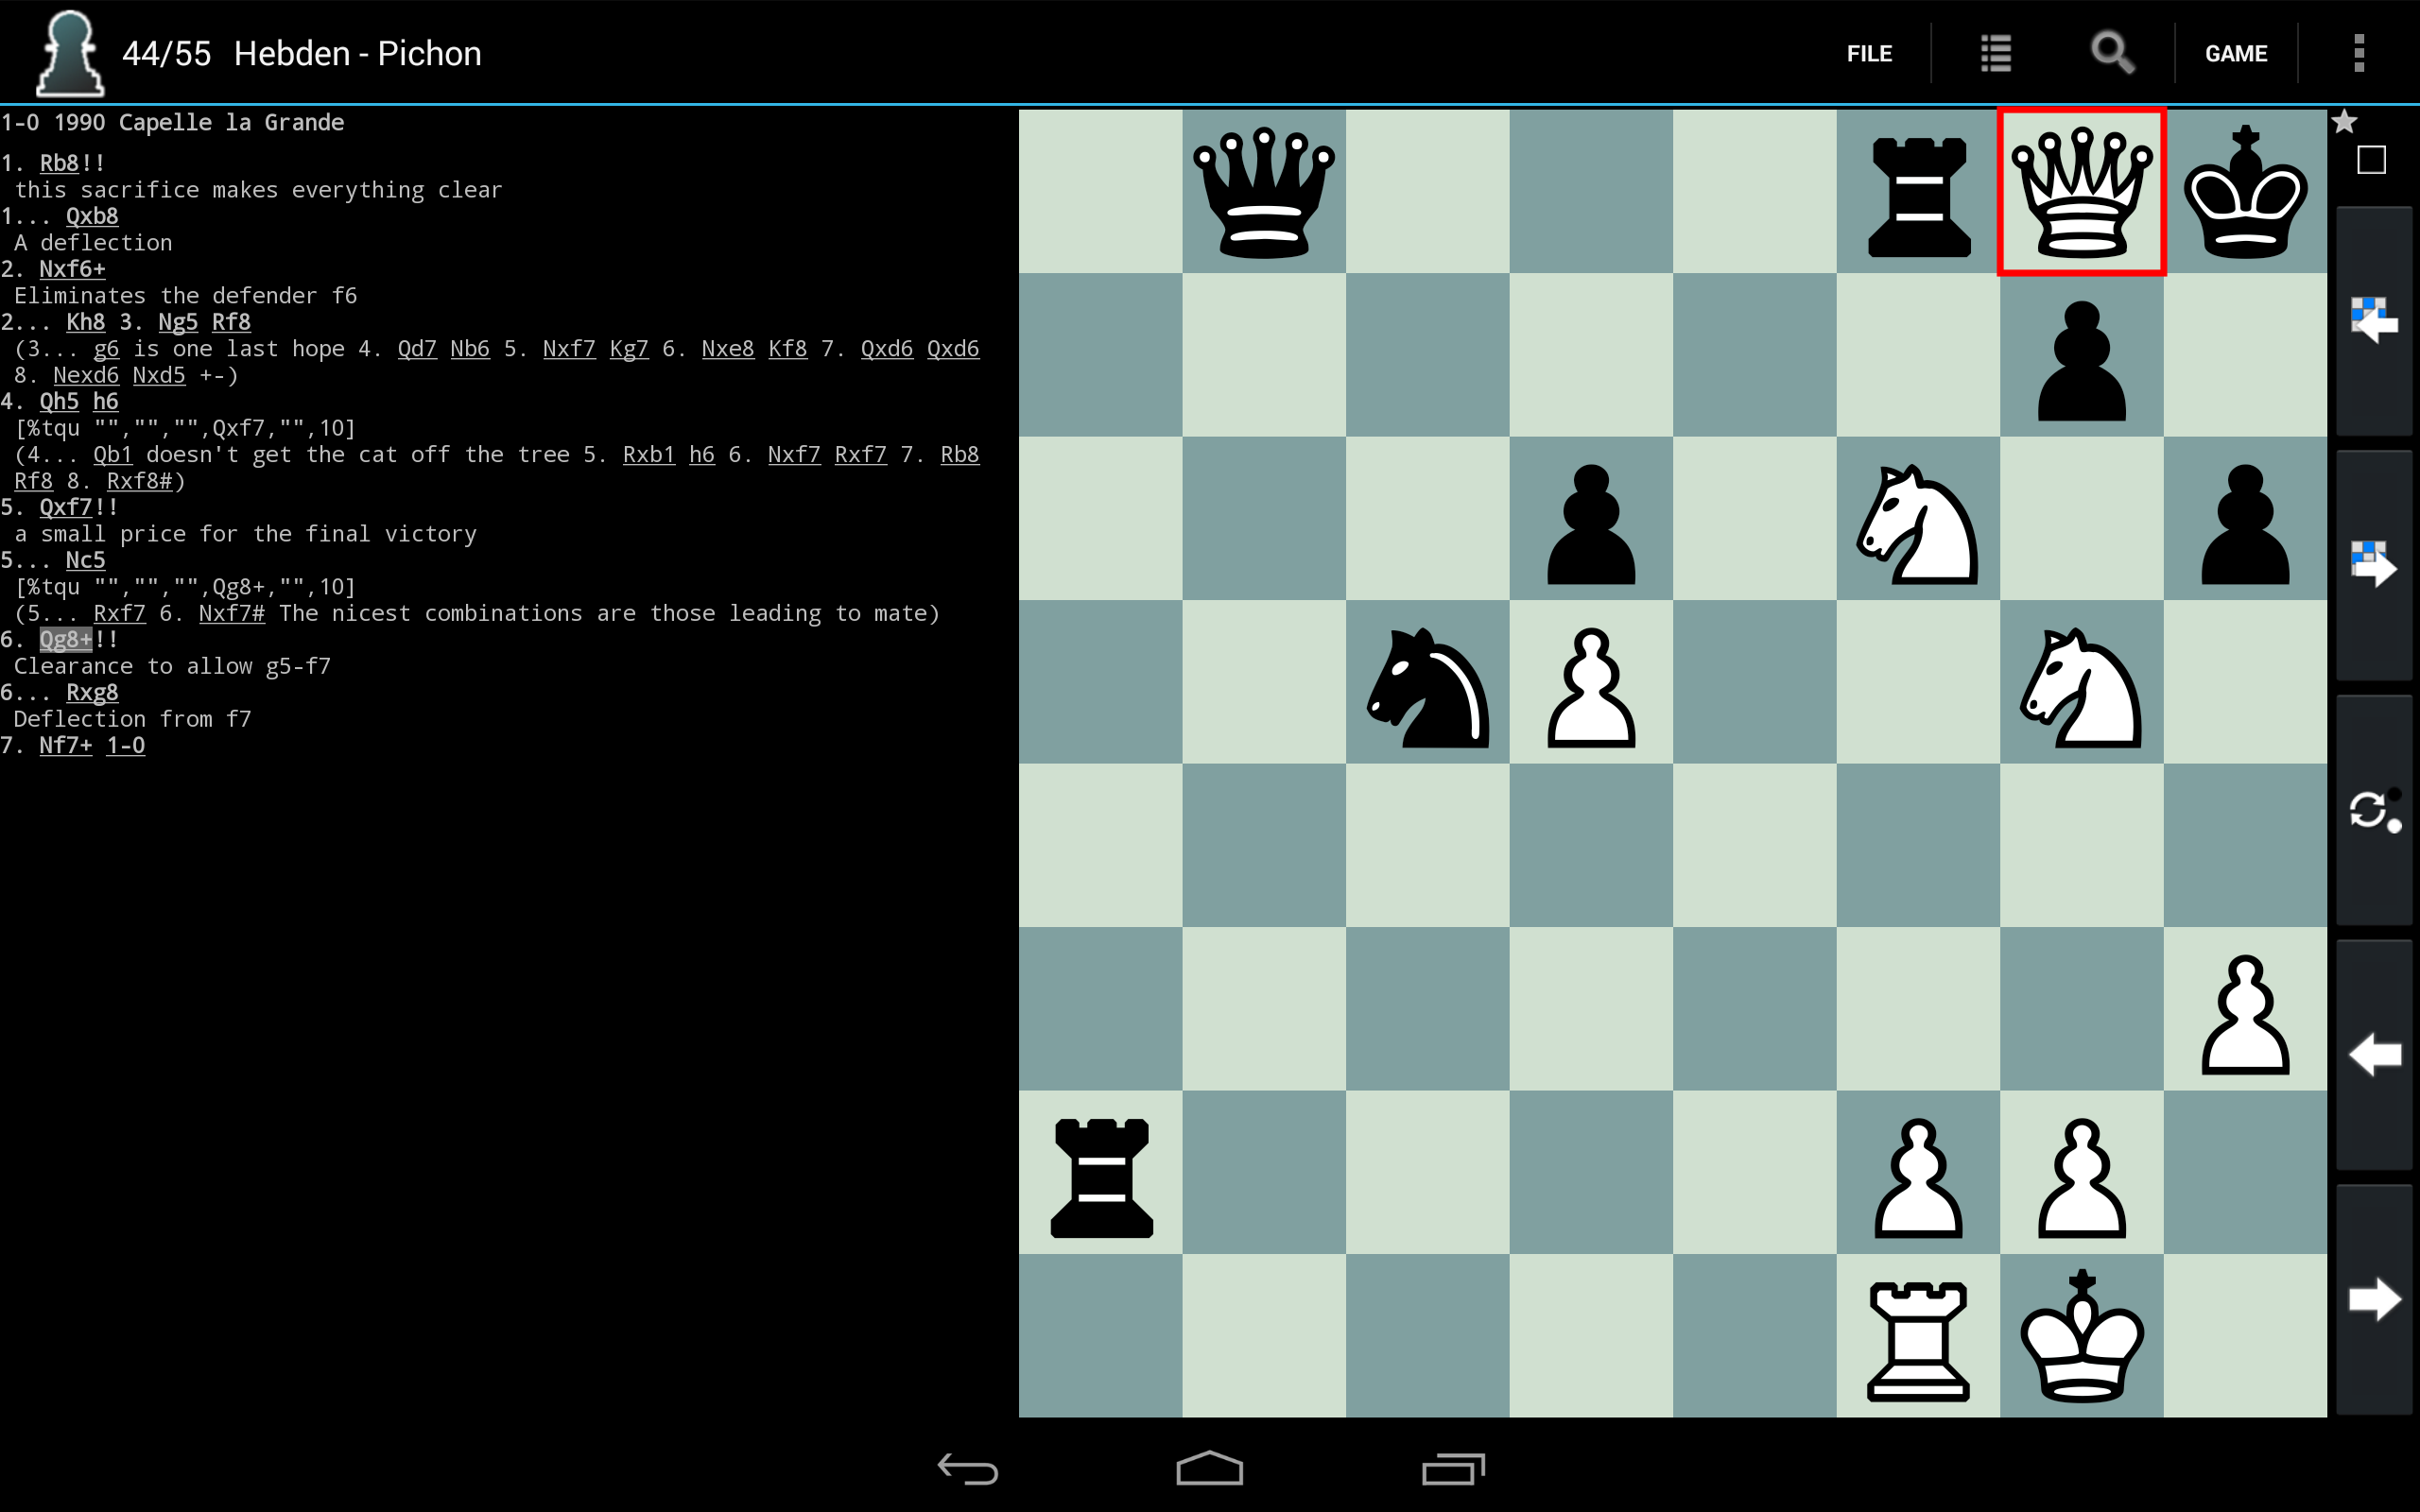 FollowChess App Review (Free Vs Paid) - Chess Questions